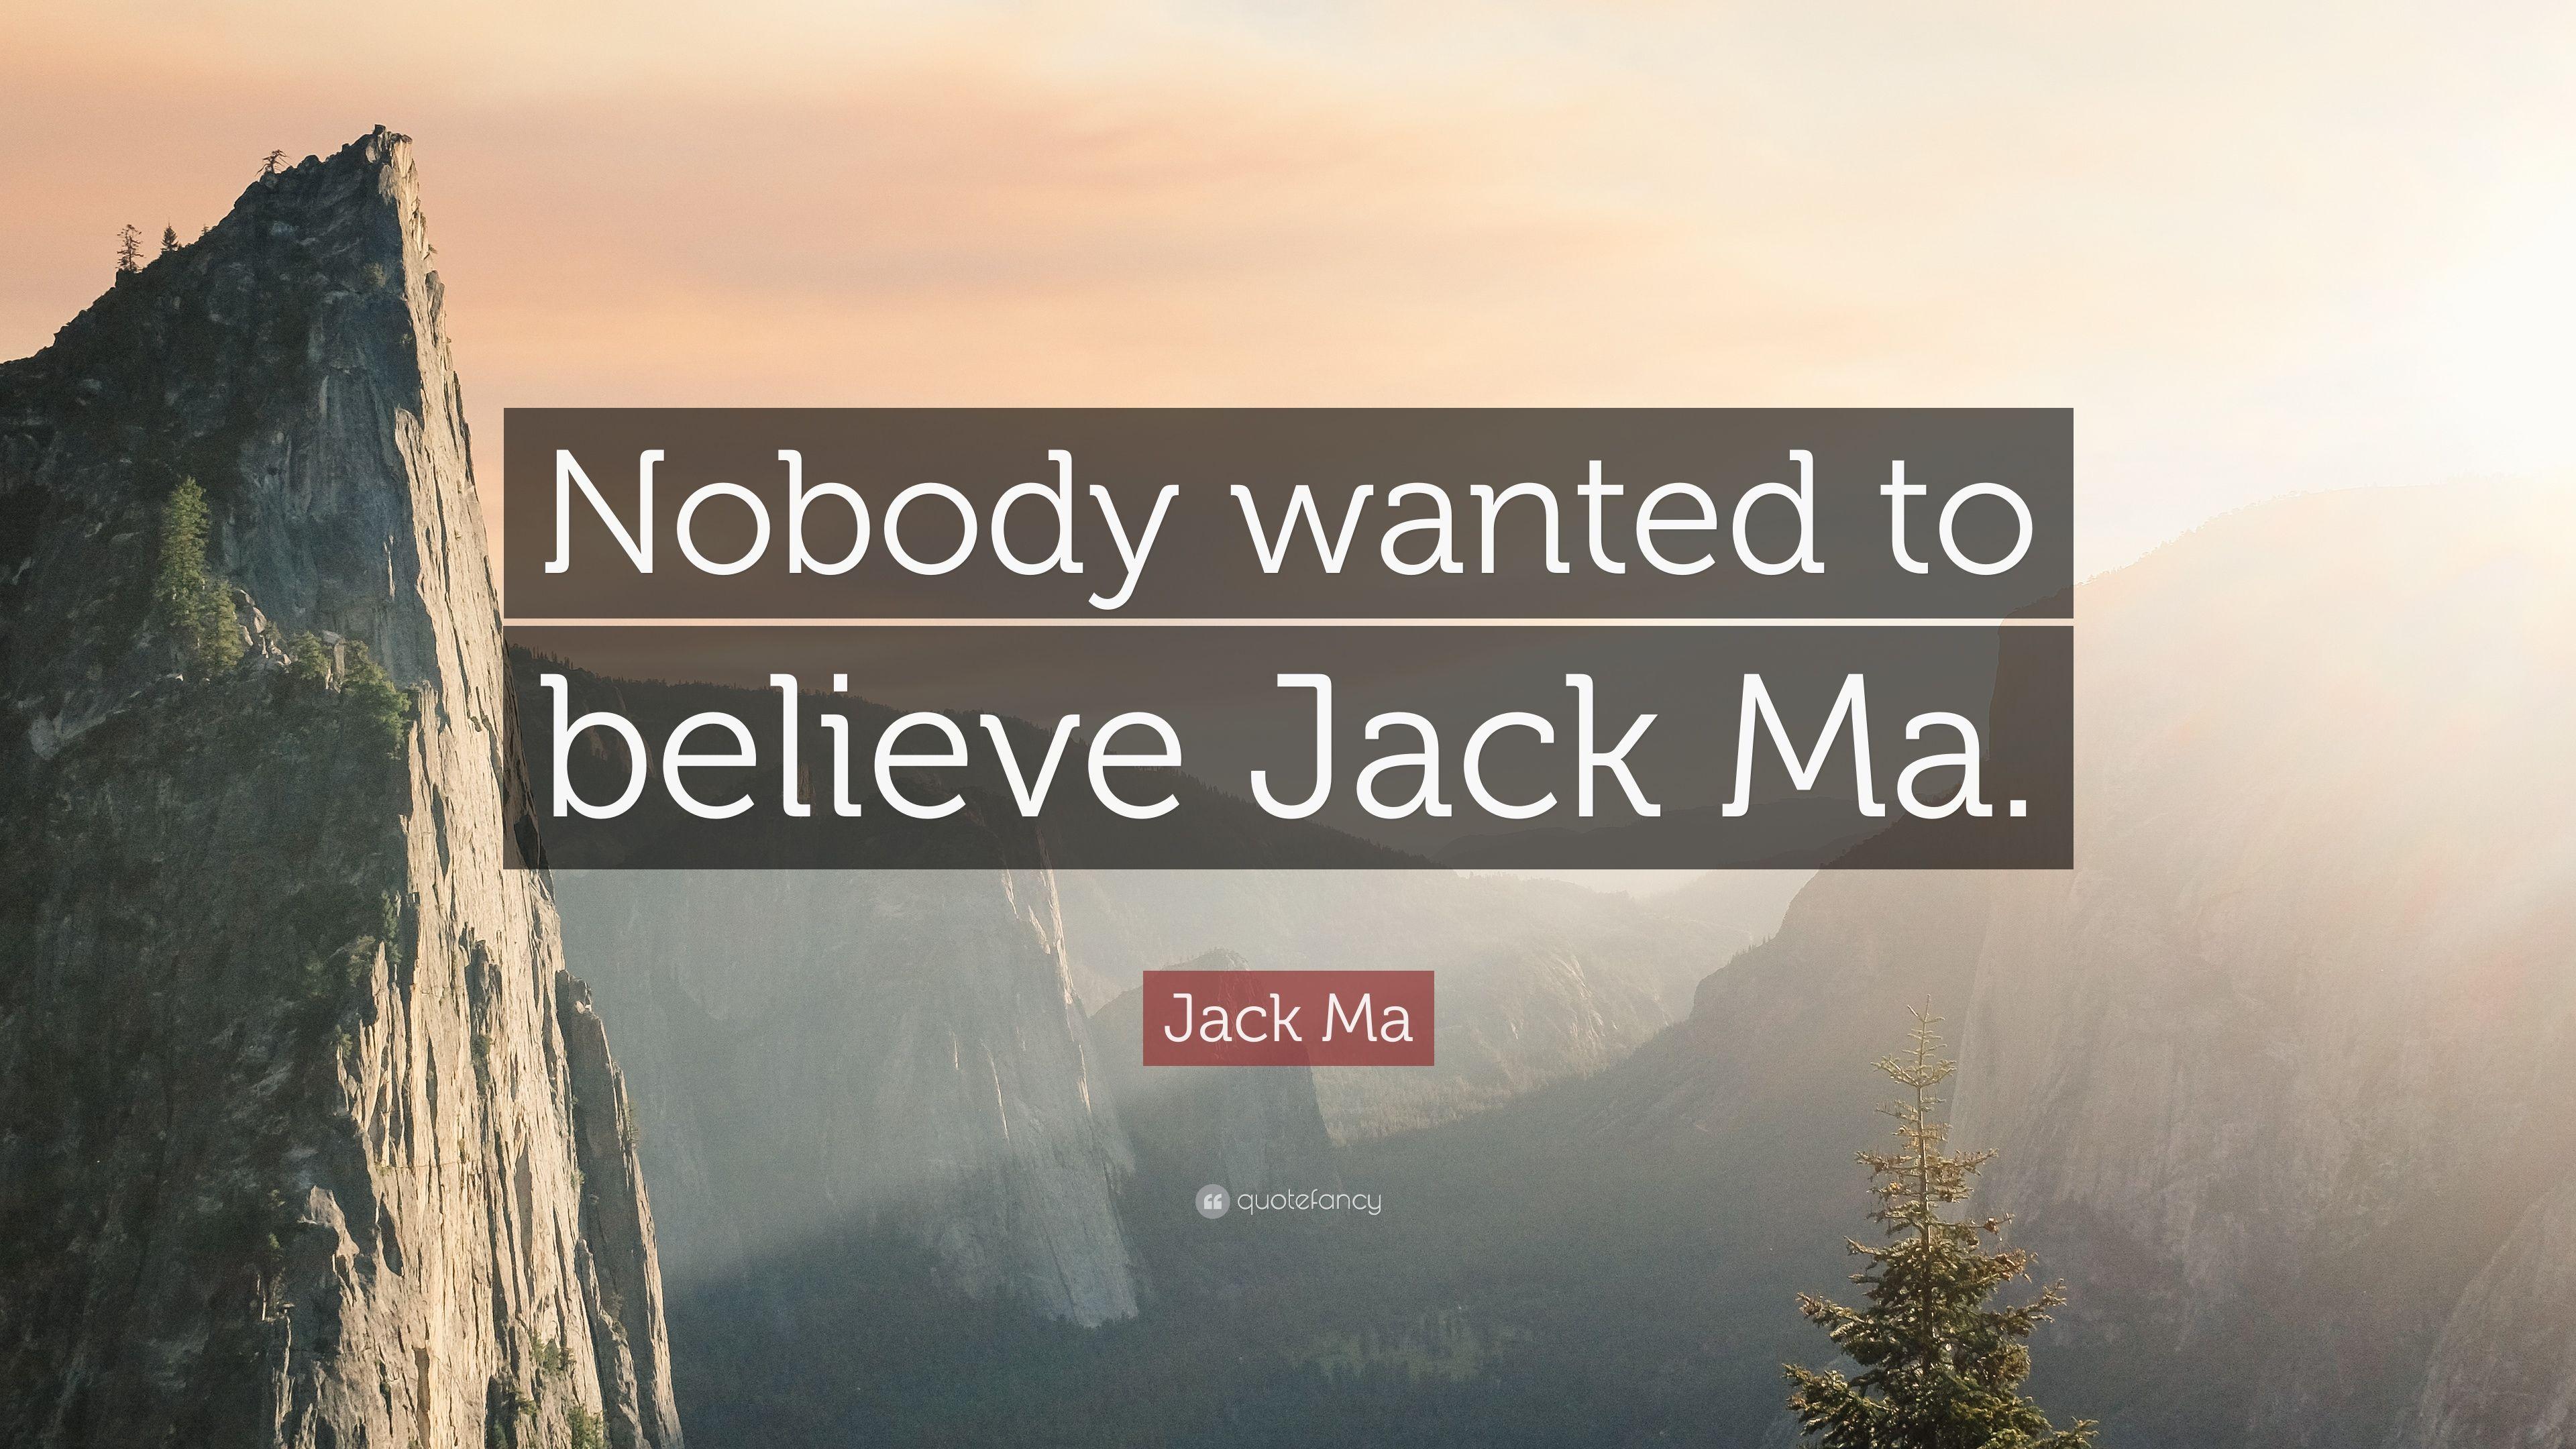 Jack Ma Quote: “Nobody wanted to believe Jack Ma.” 12 wallpaper